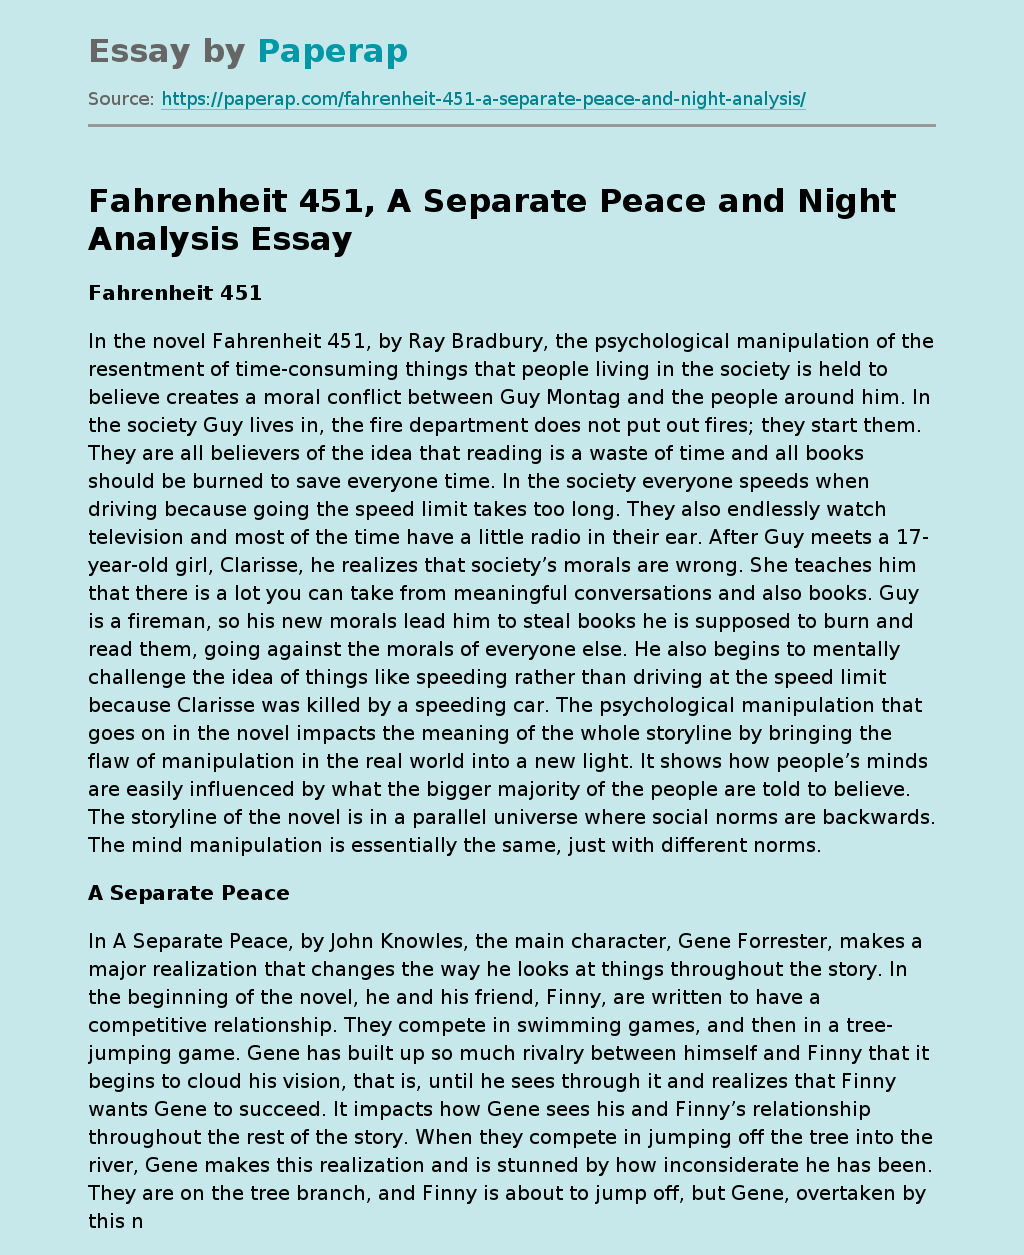 Fahrenheit 451, A Separate Peace and Night Analysis